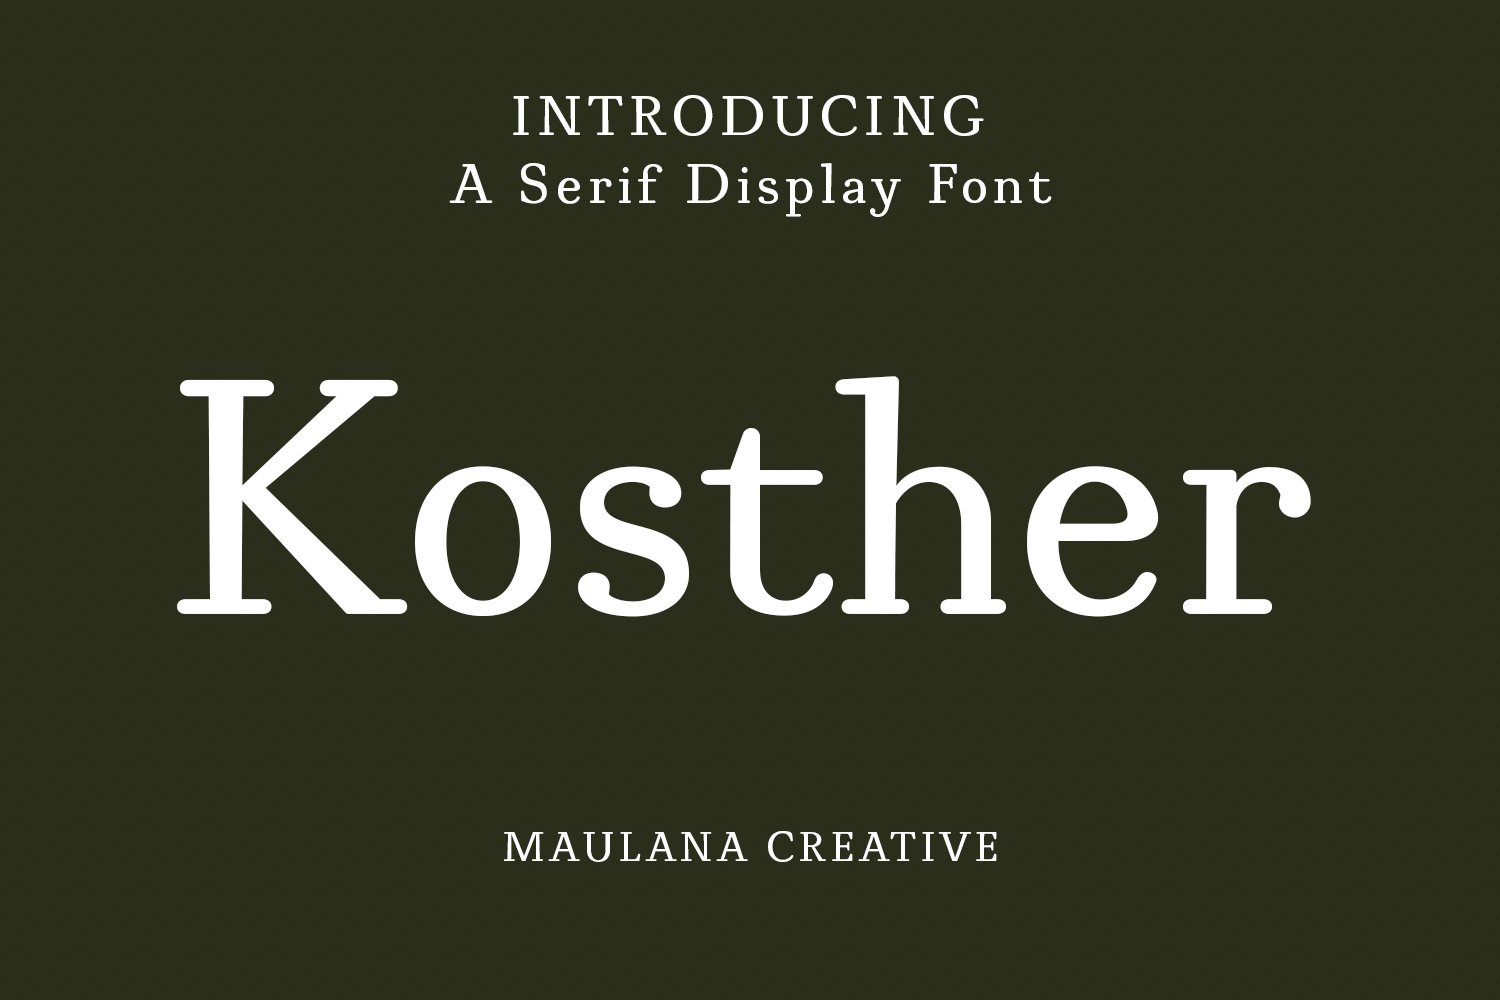 Kosther Classic Serif Fontcover image.